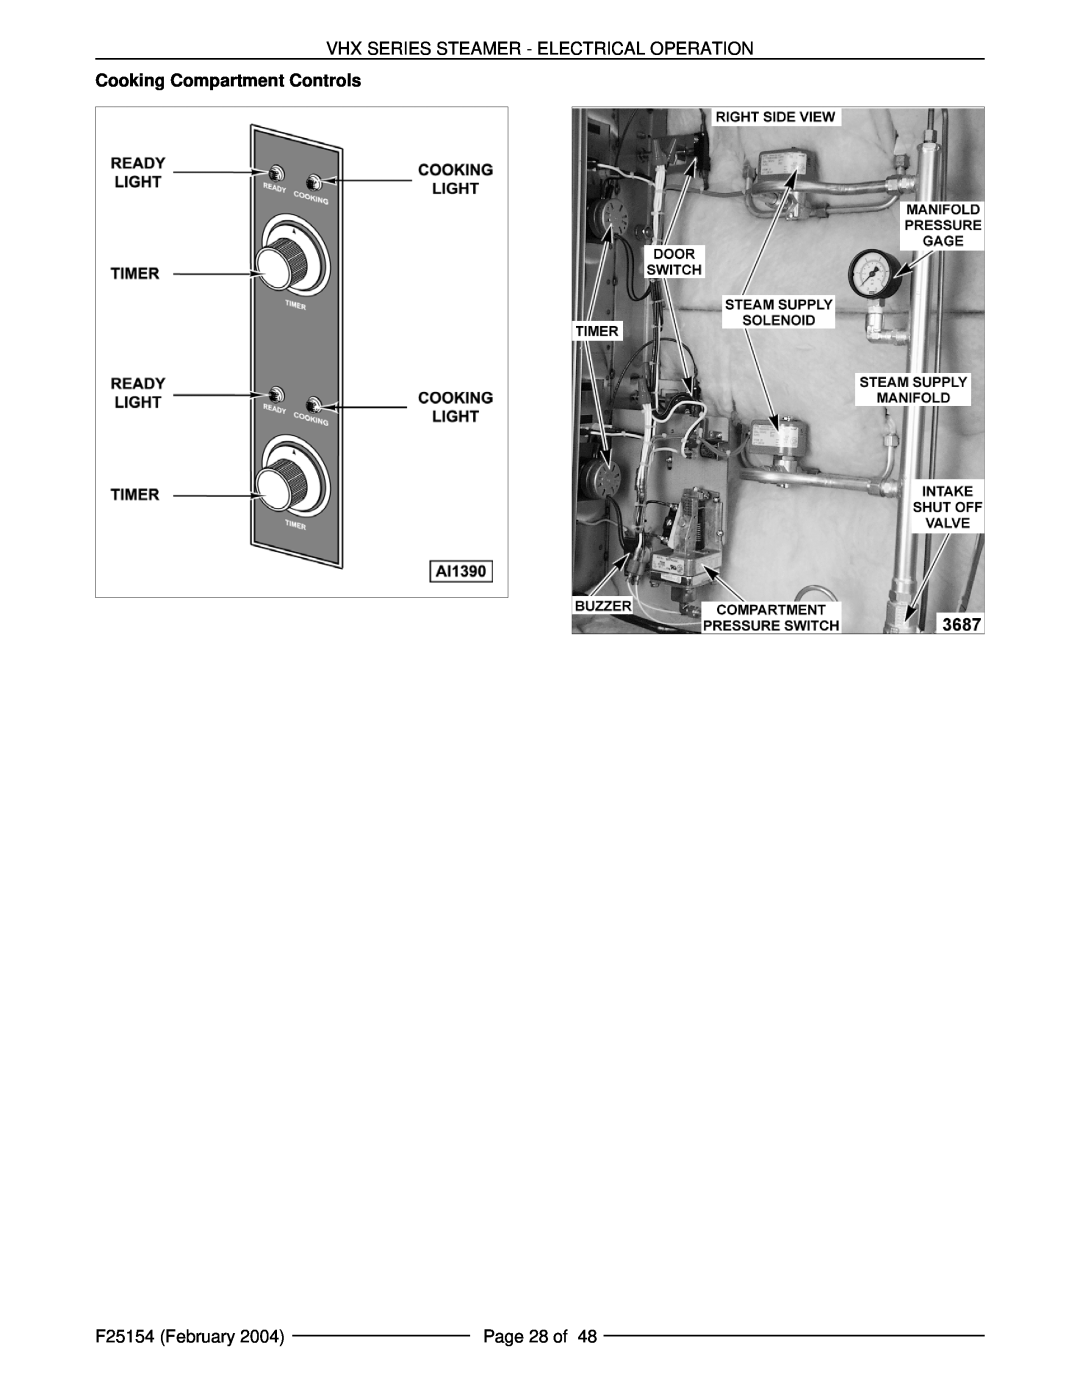 Vulcan-Hart MHB24E Cooking Compartment Controls, Vhx Series Steamer - Electrical Operation, F25154 February, Page 28 of 